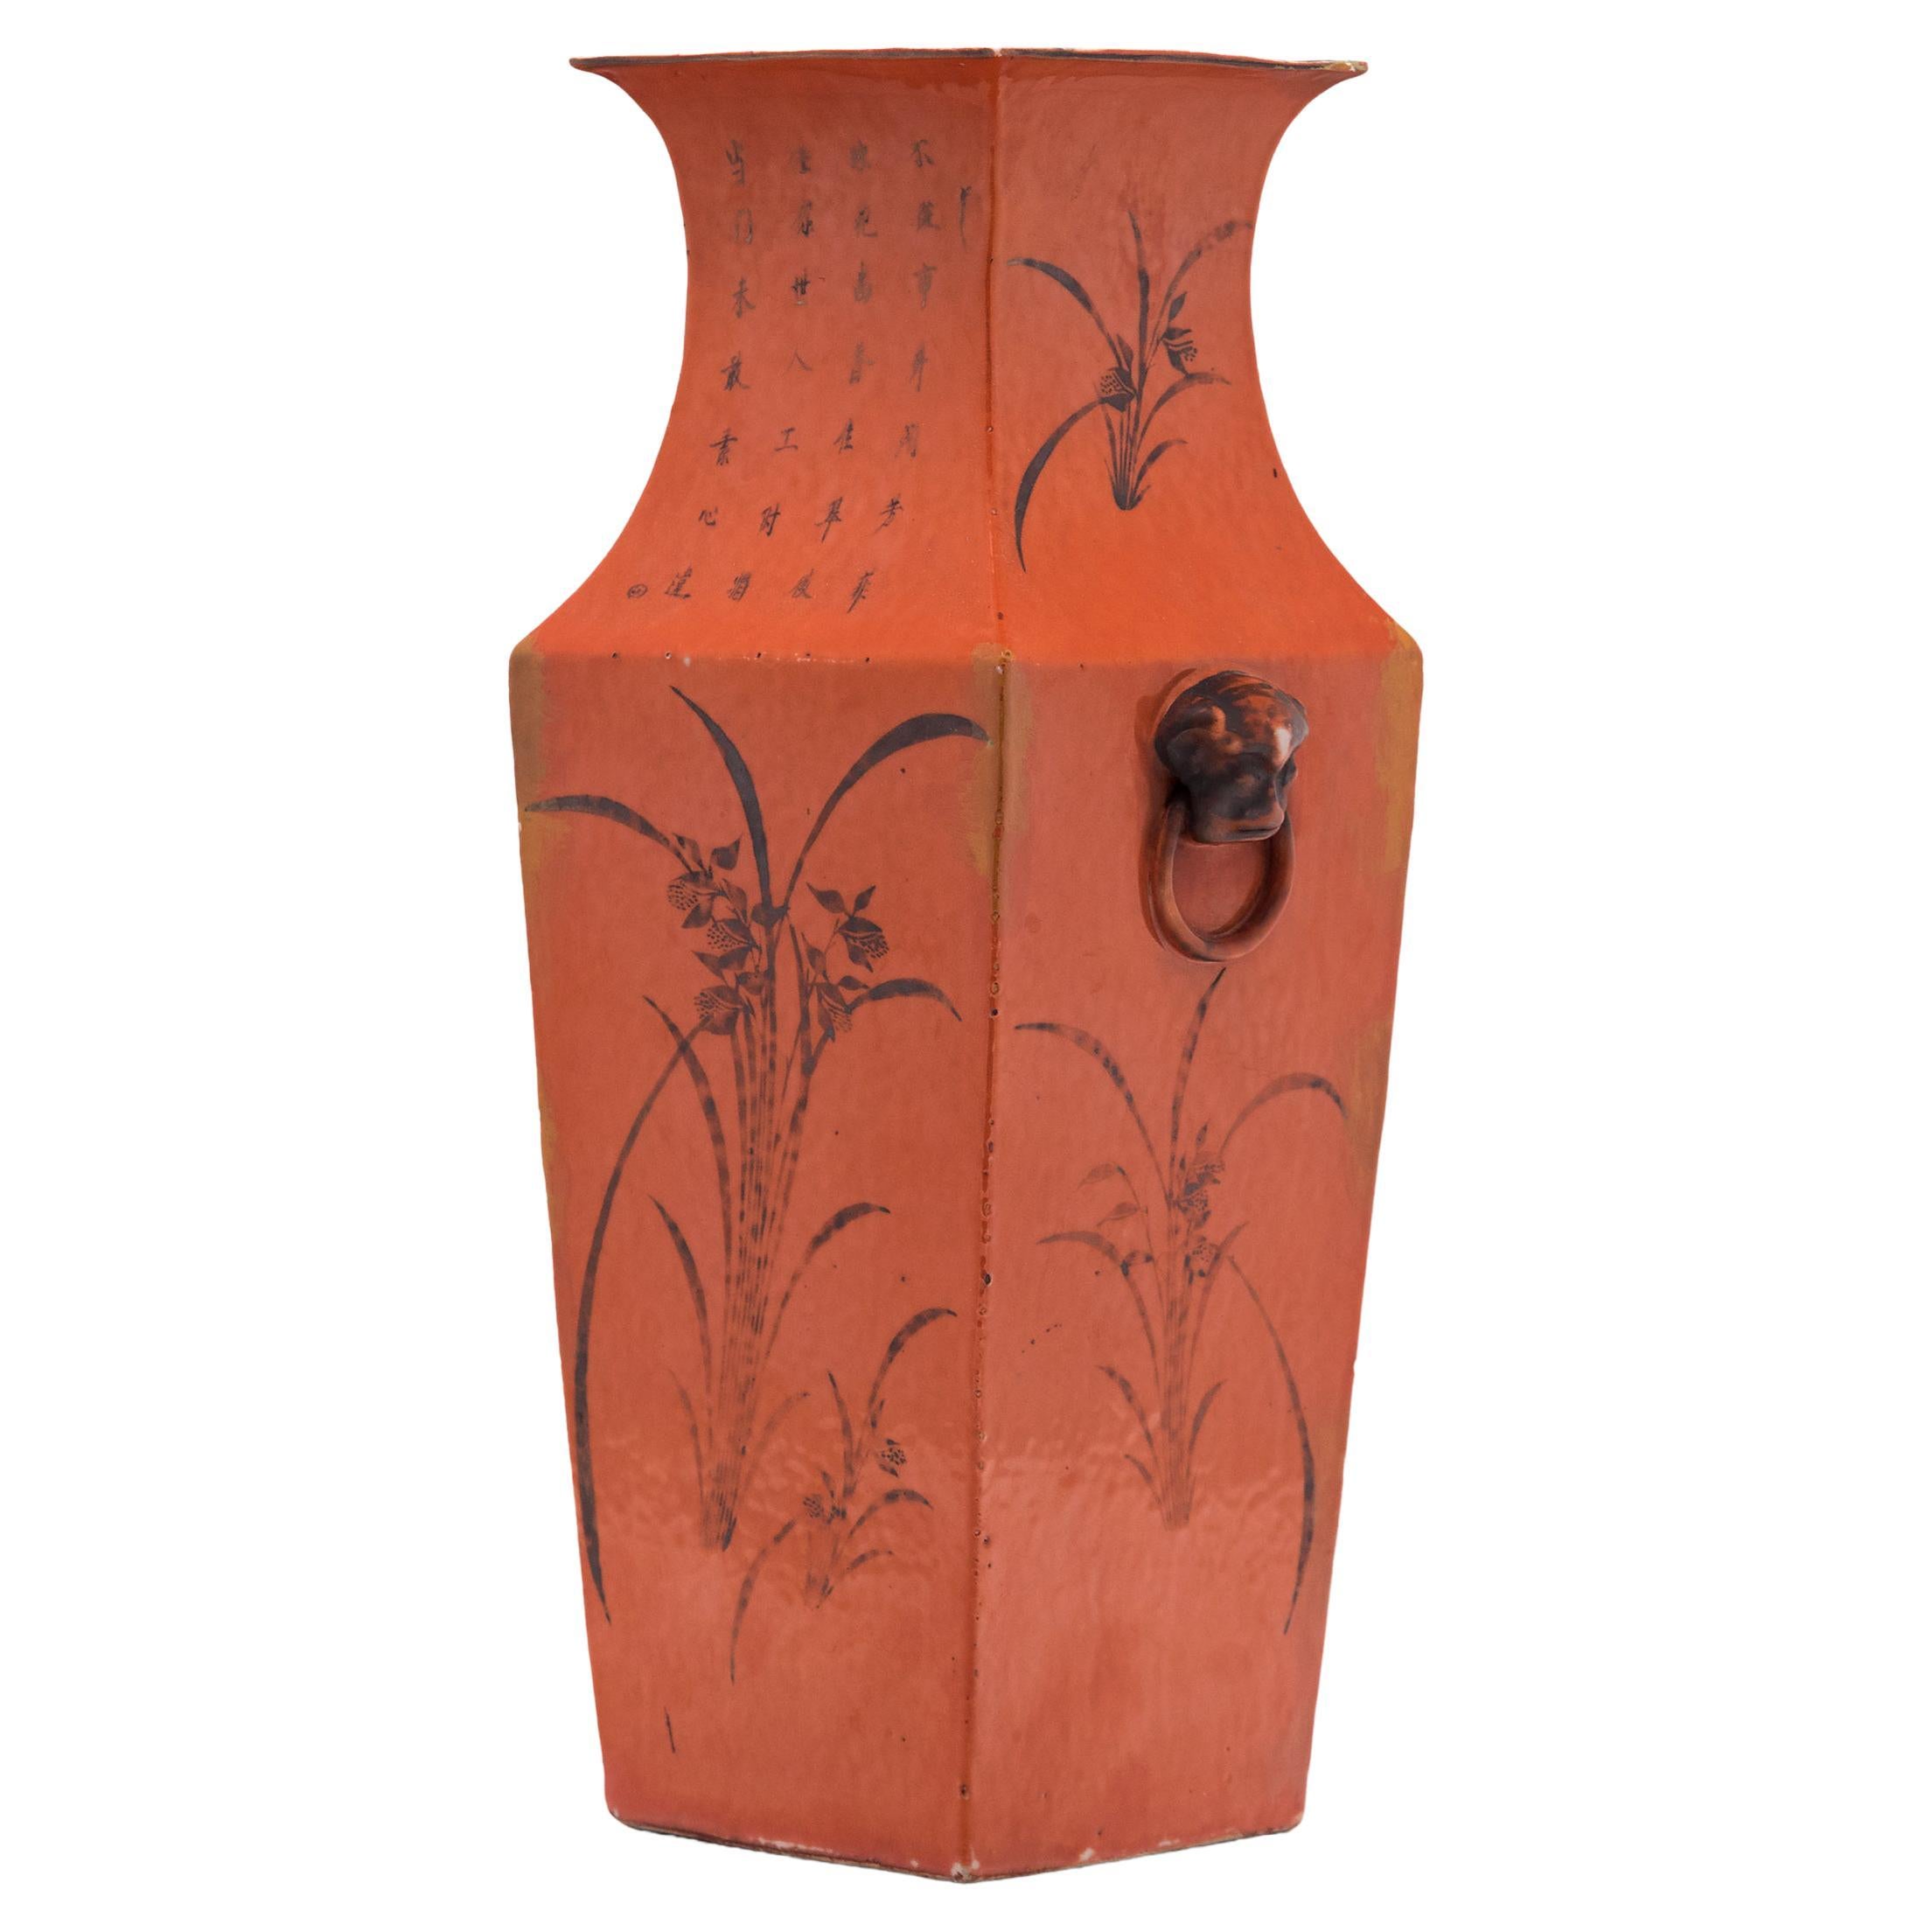 Chinese Persimmon Squared Fantail Vase, c. 1920